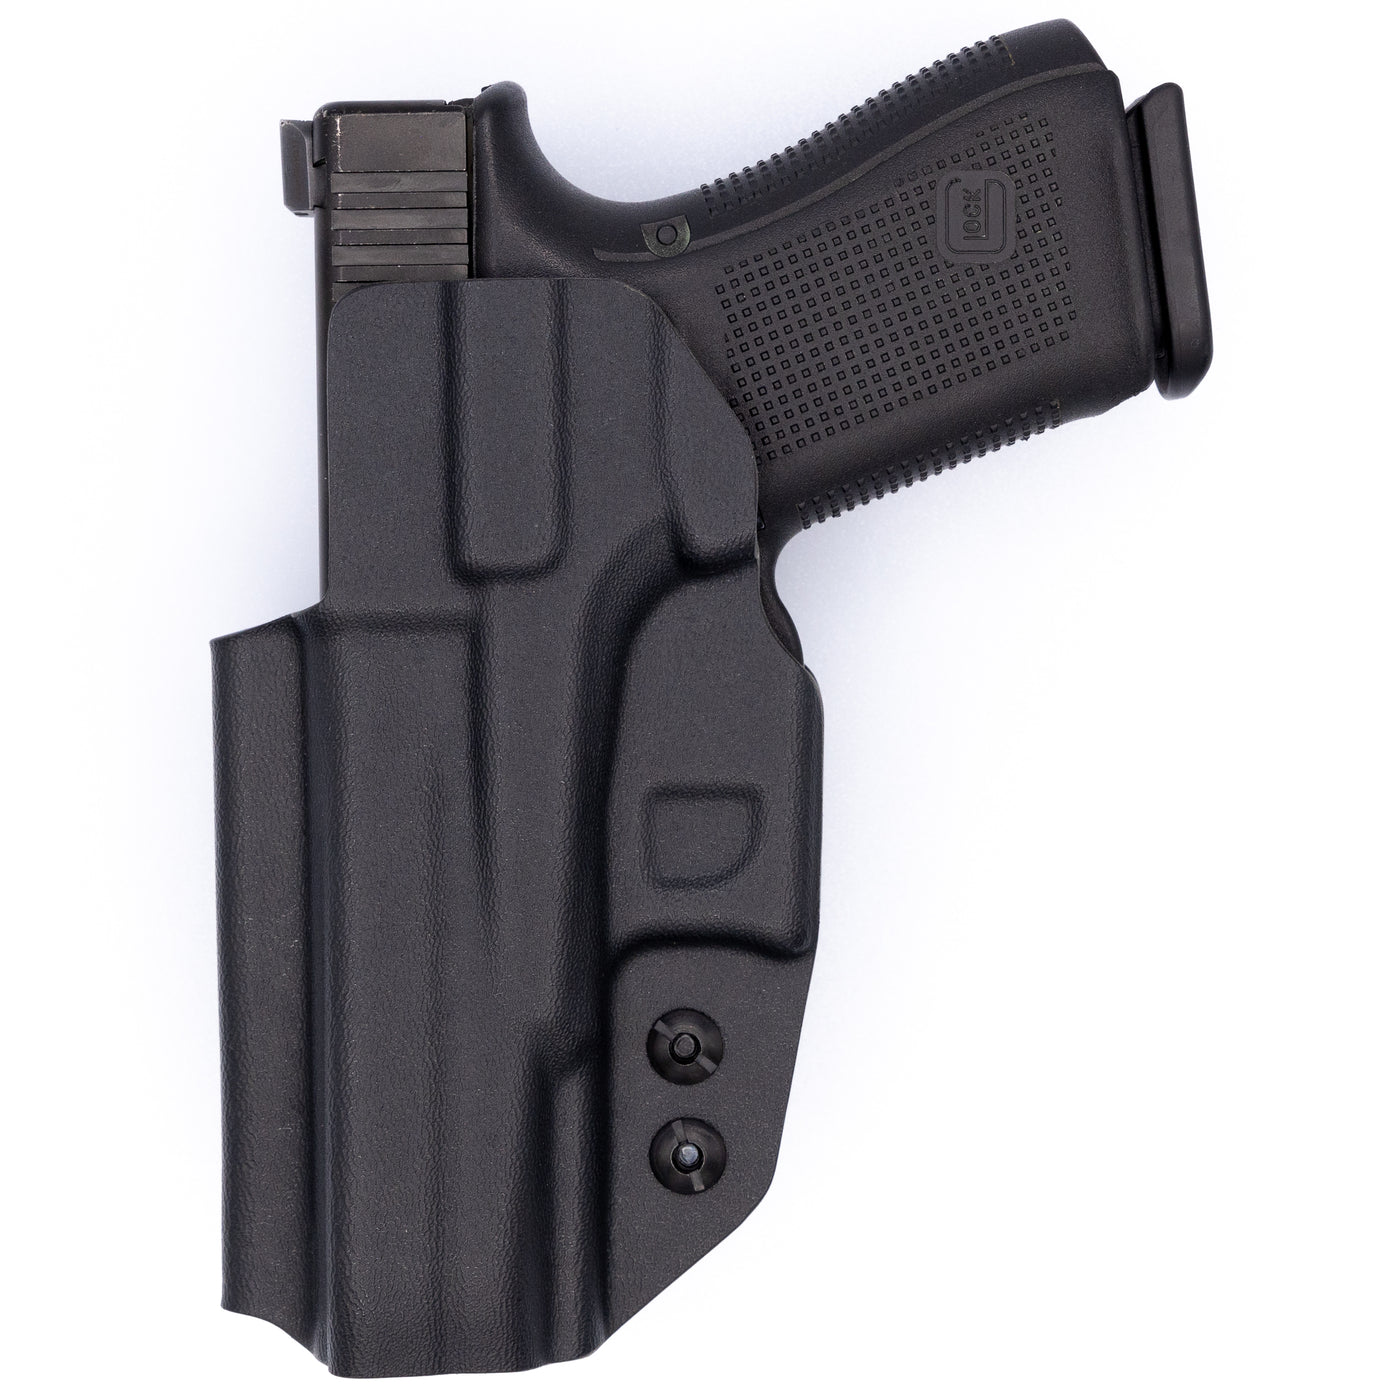 C&G Holsters quickship IWB holster back view